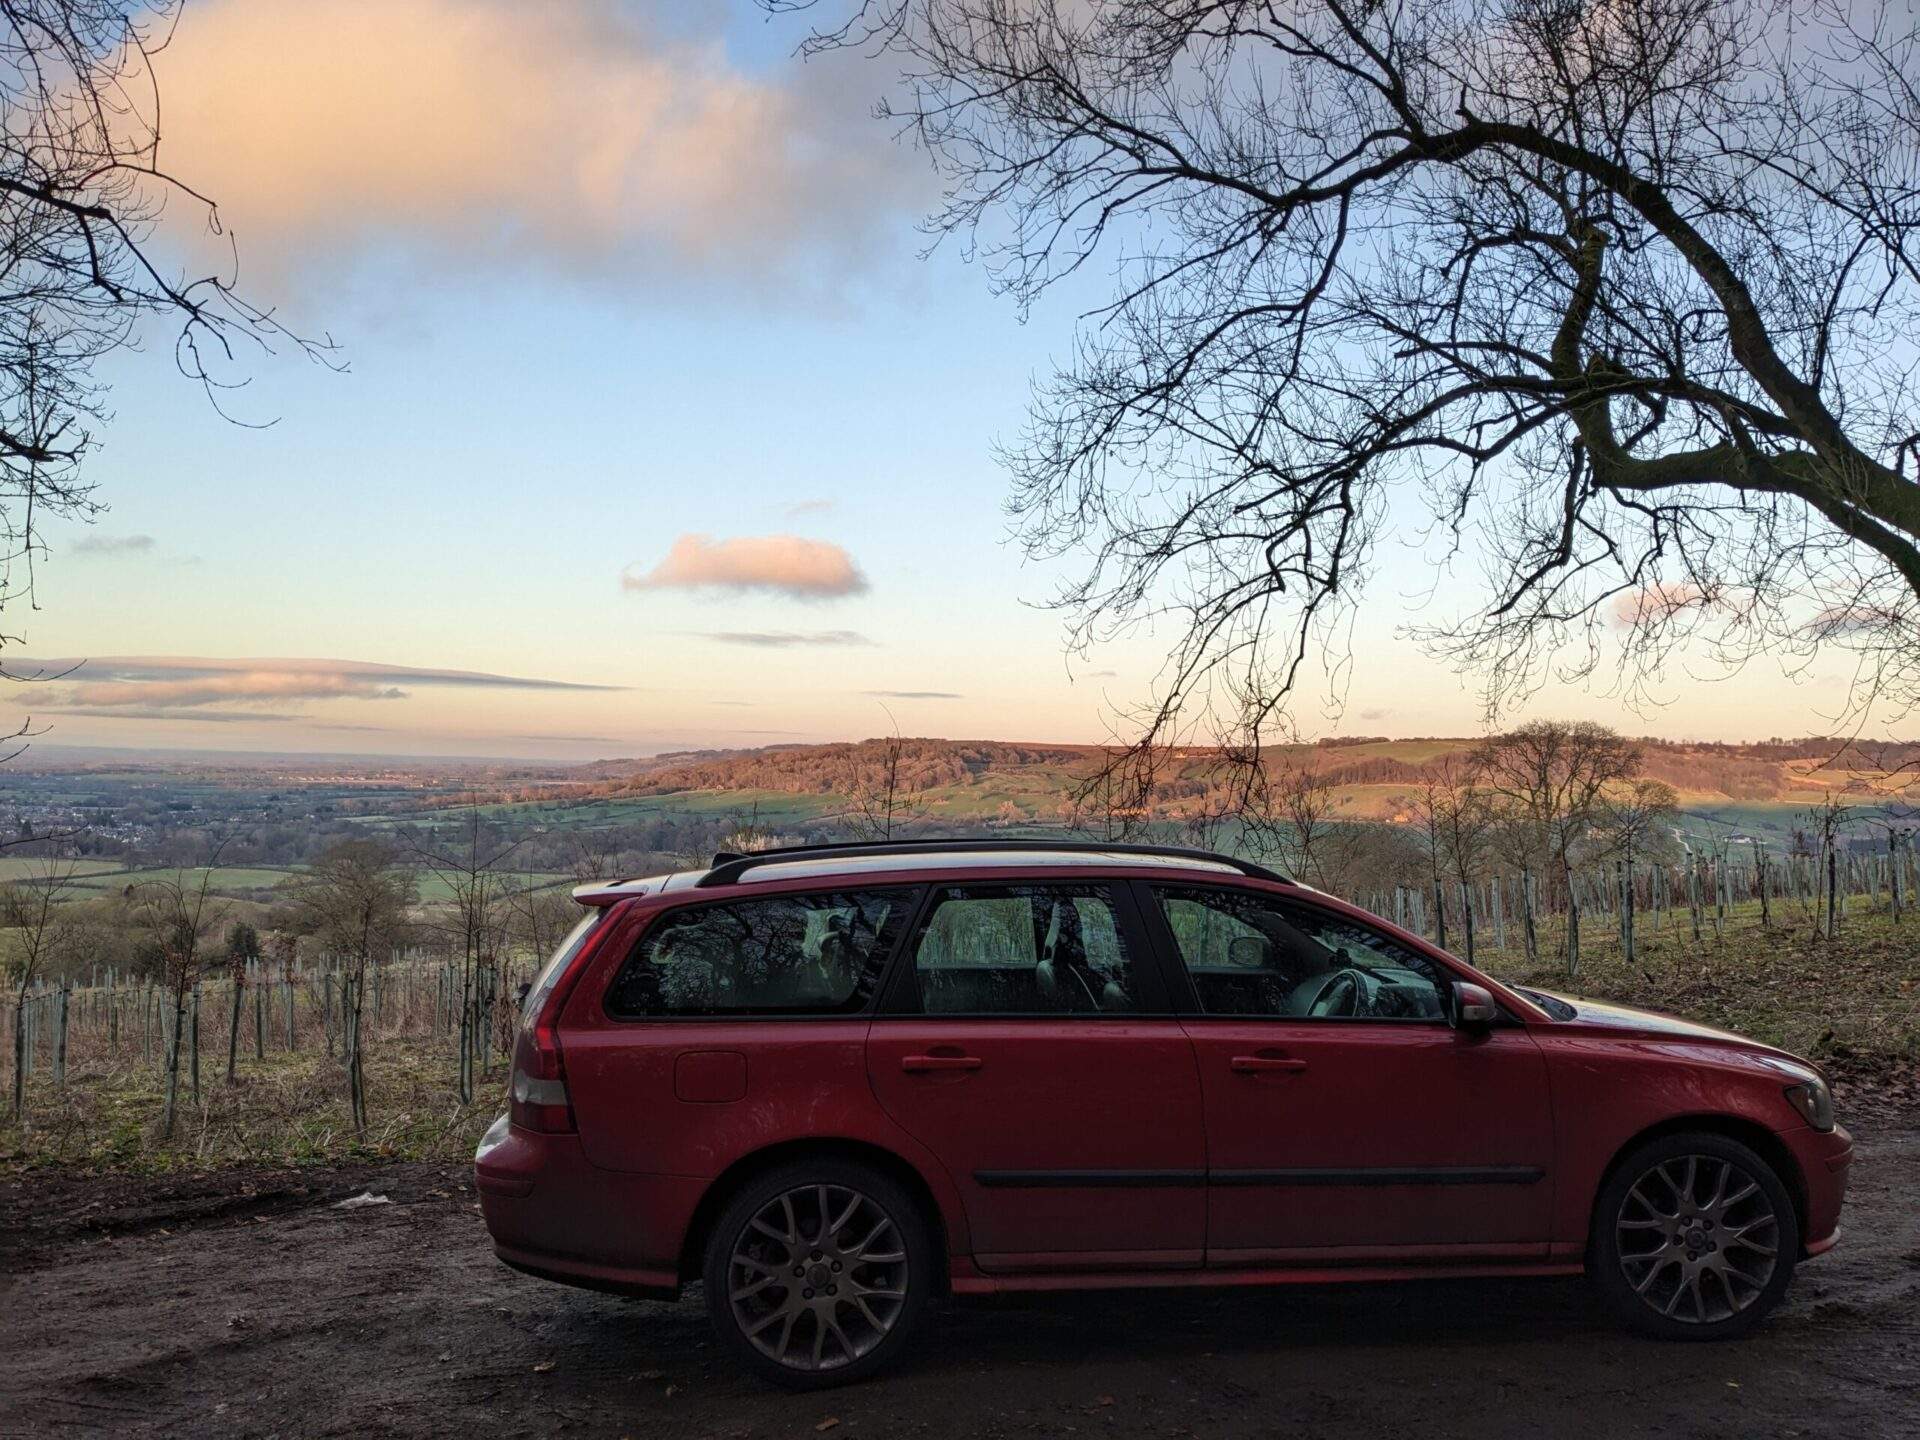 Gloucestershire countryside with my red Volvo parked in front of a stunning view